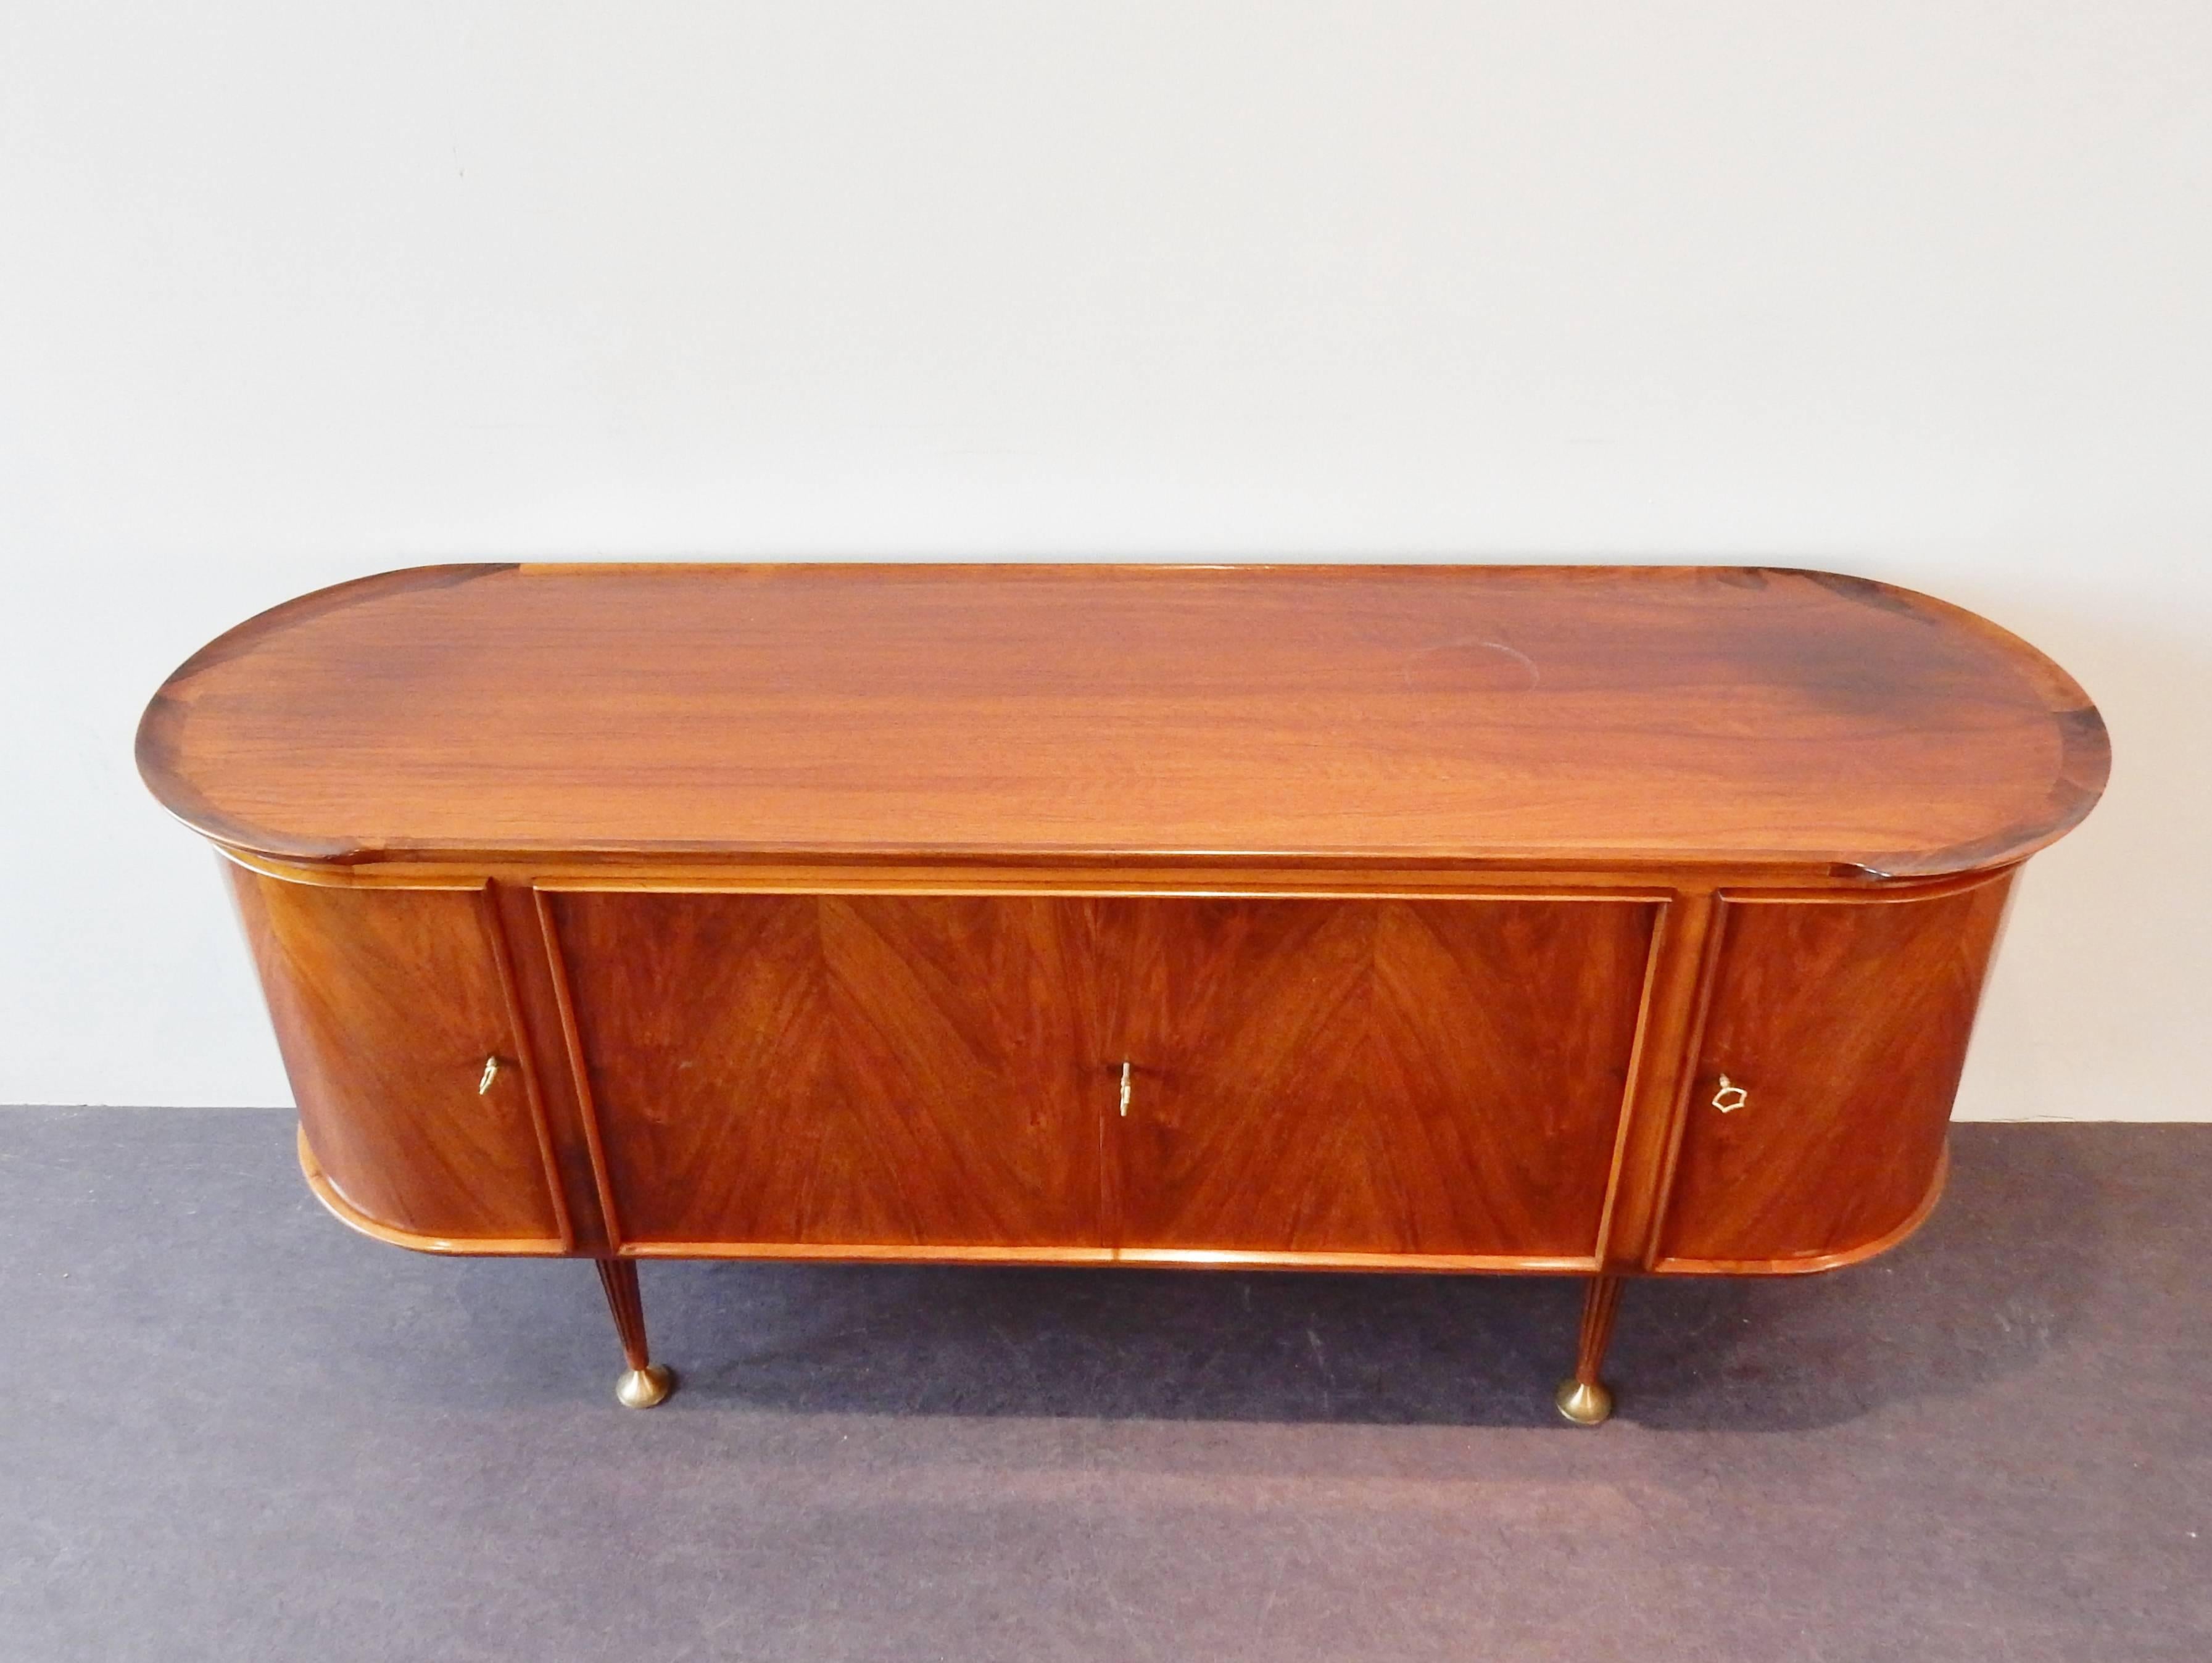 Mid-20th Century Sideboard in Mahogany by A.A. Patijn for Zijlstra Joure, Netherlands, 1950s